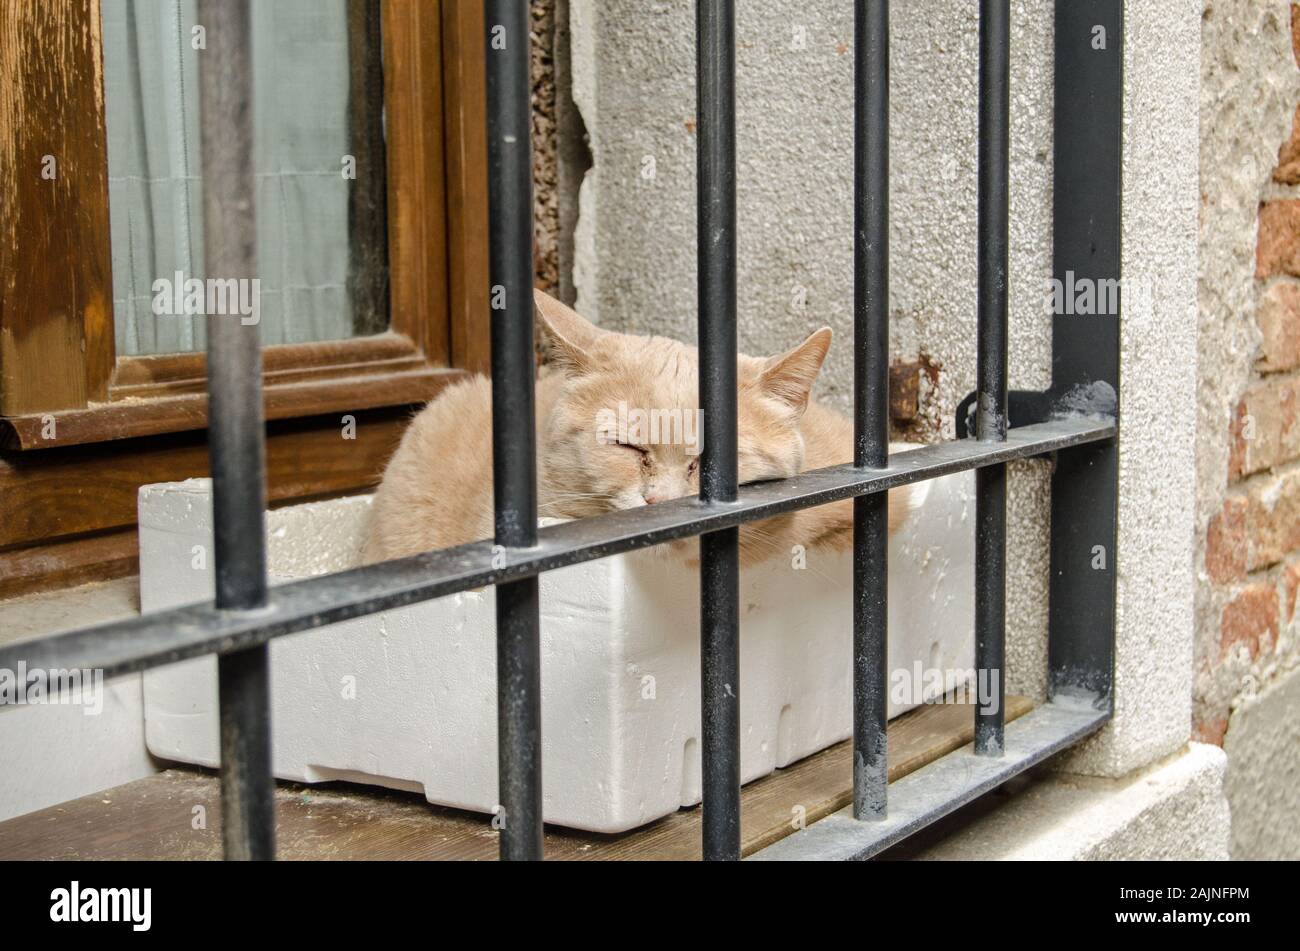 Elderly cat sleeping in a polystyrene box on a windowledge protected by bars on a street in Venice, Italy. Stock Photo